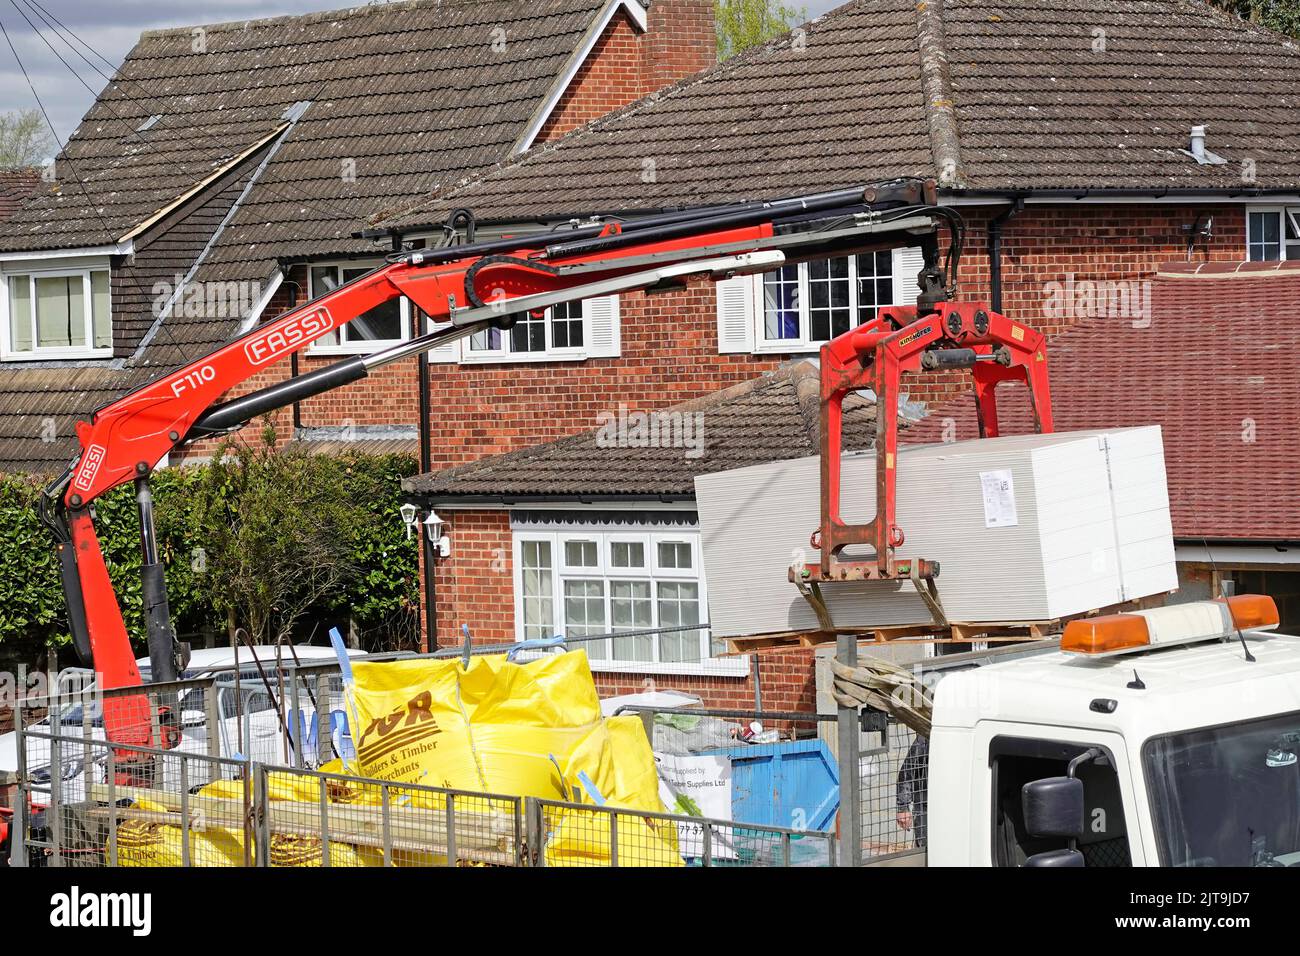 Close up builders merchant lorry truck mounted hydraulic crane delivery driver below controls building construction site materials offload  England UK Stock Photo